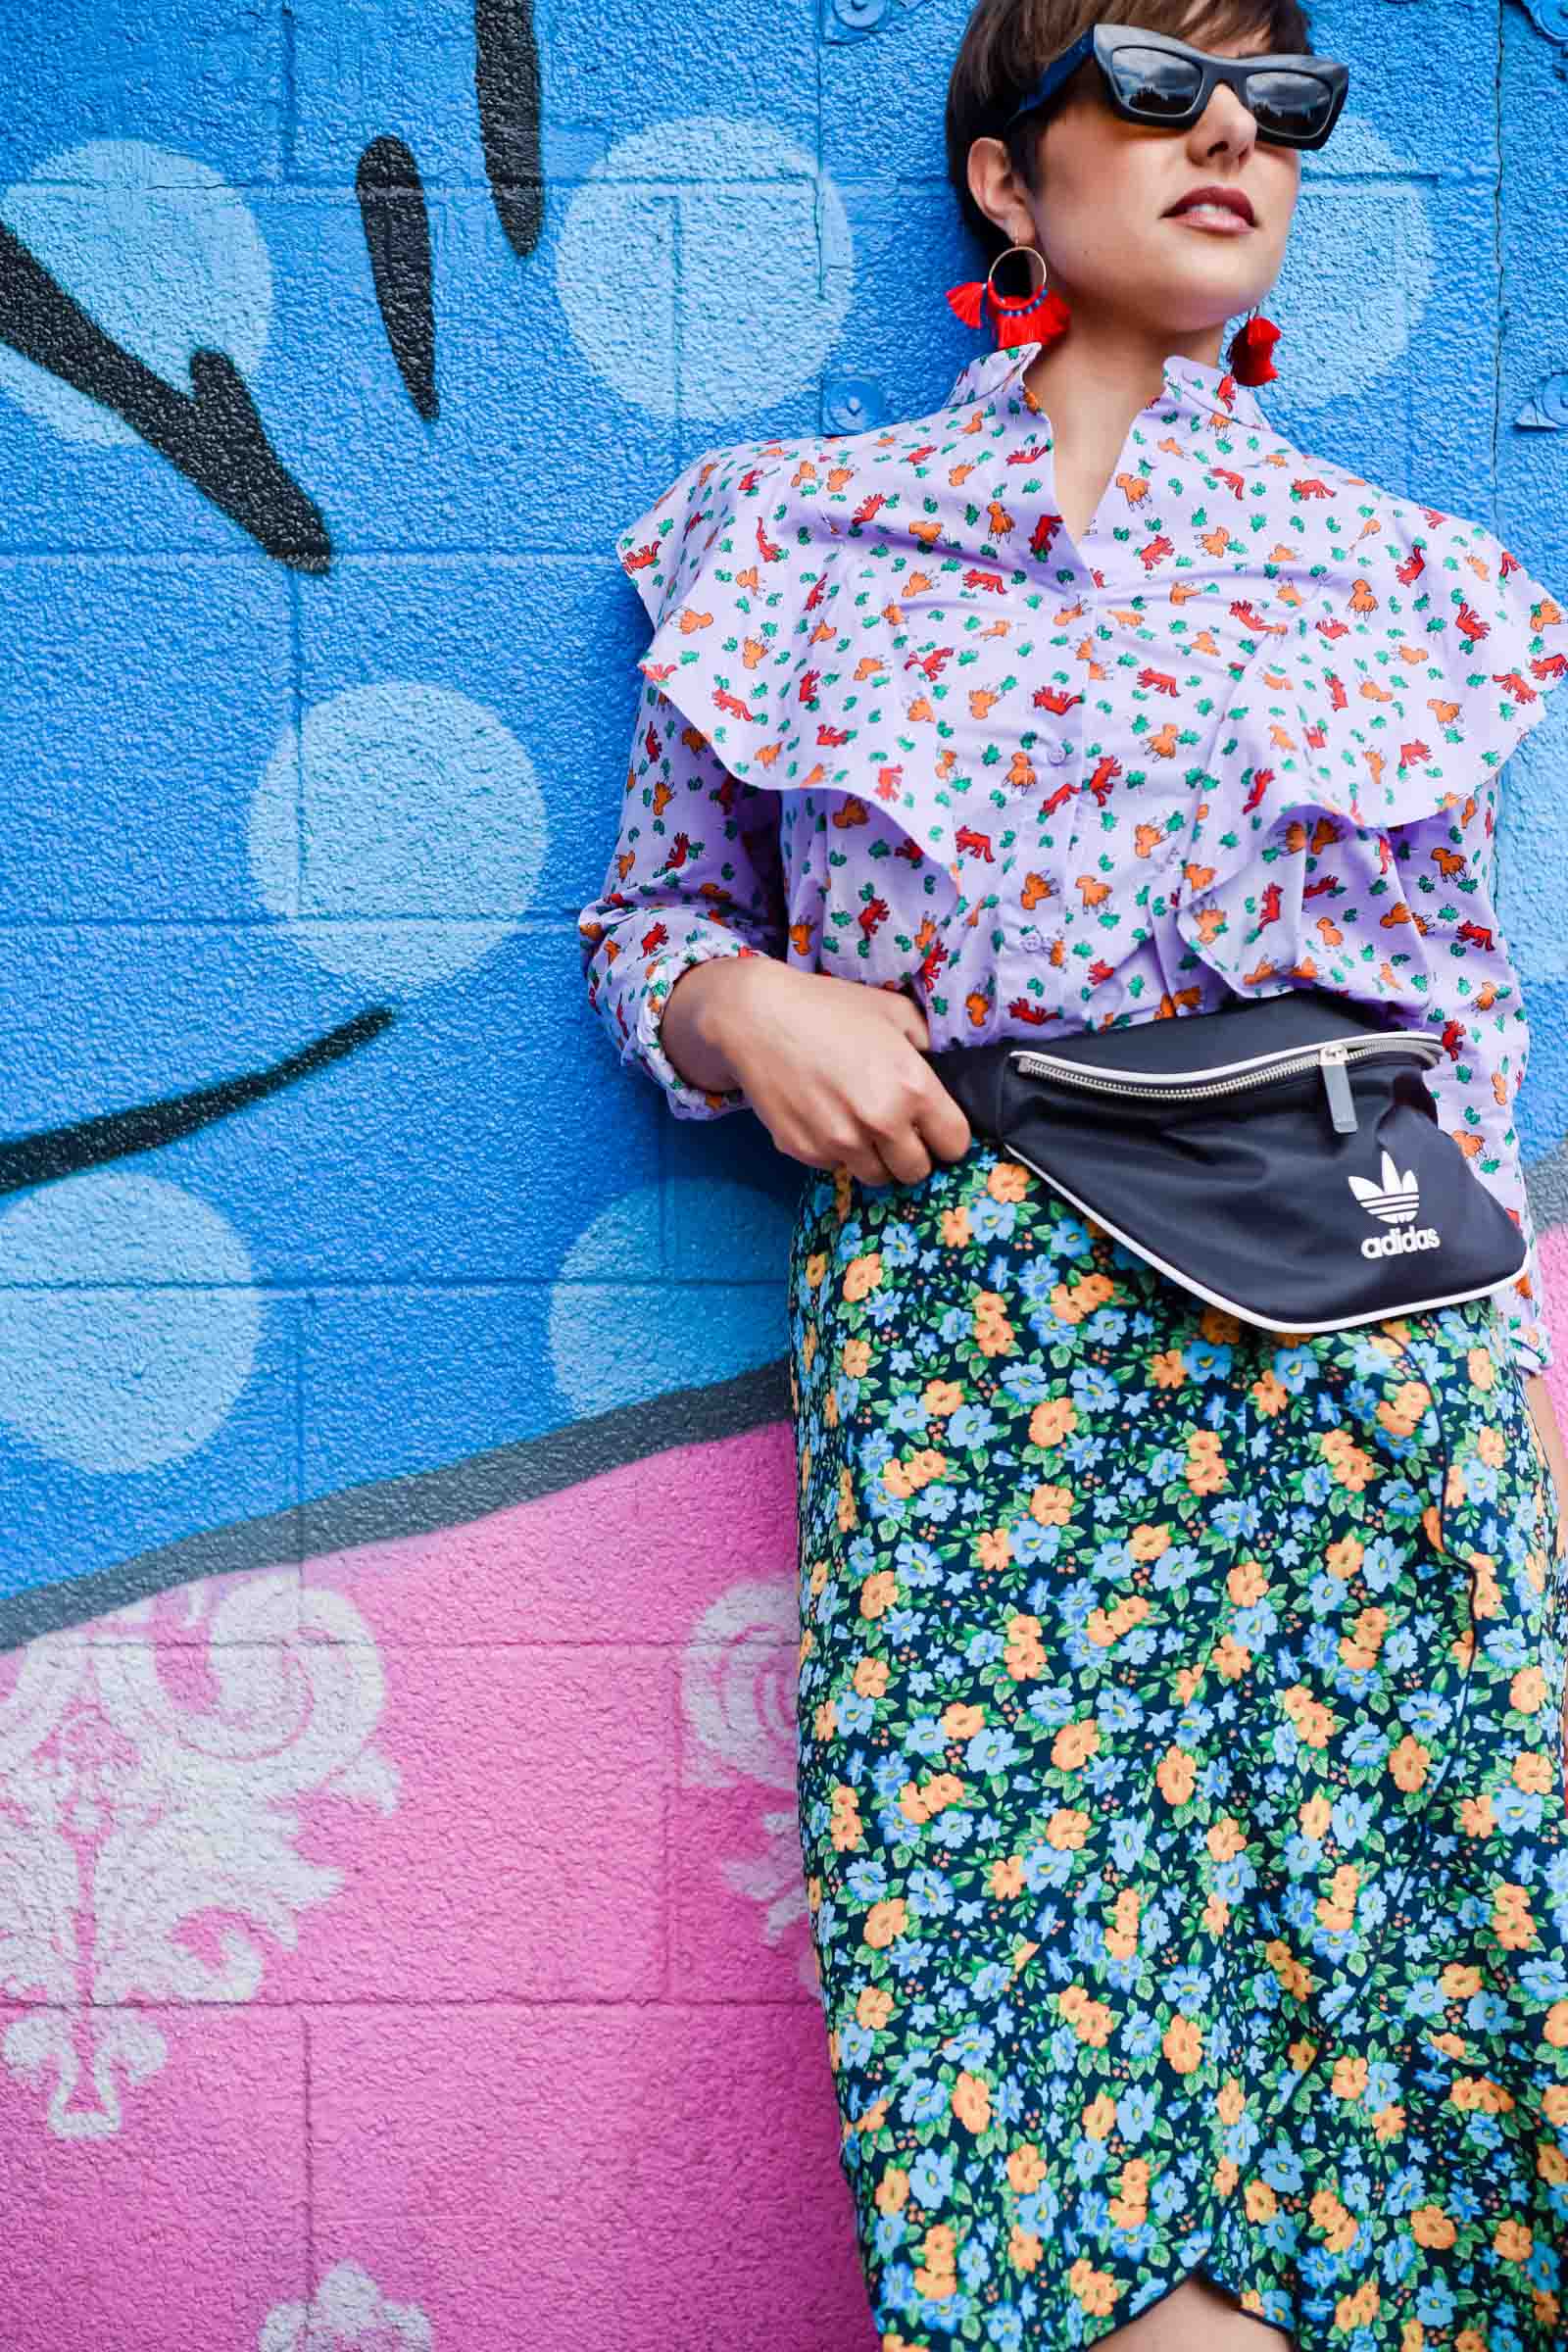 Clashing Prints: The New Way to Mix Your Prints for Fall- BloggerNotBillionaire